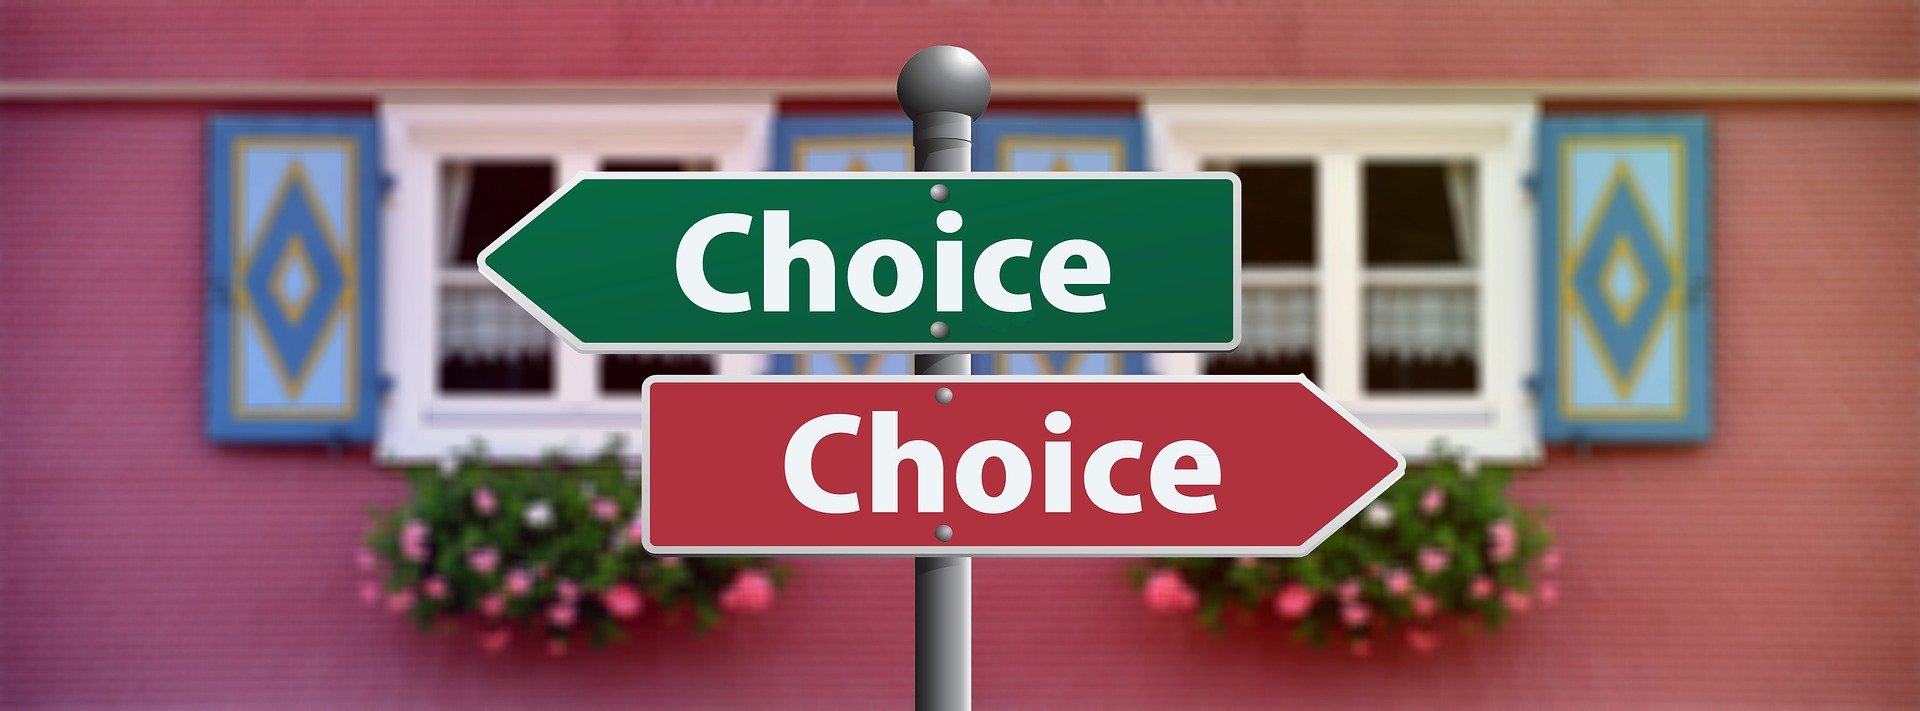 Do You Own Your Choices?